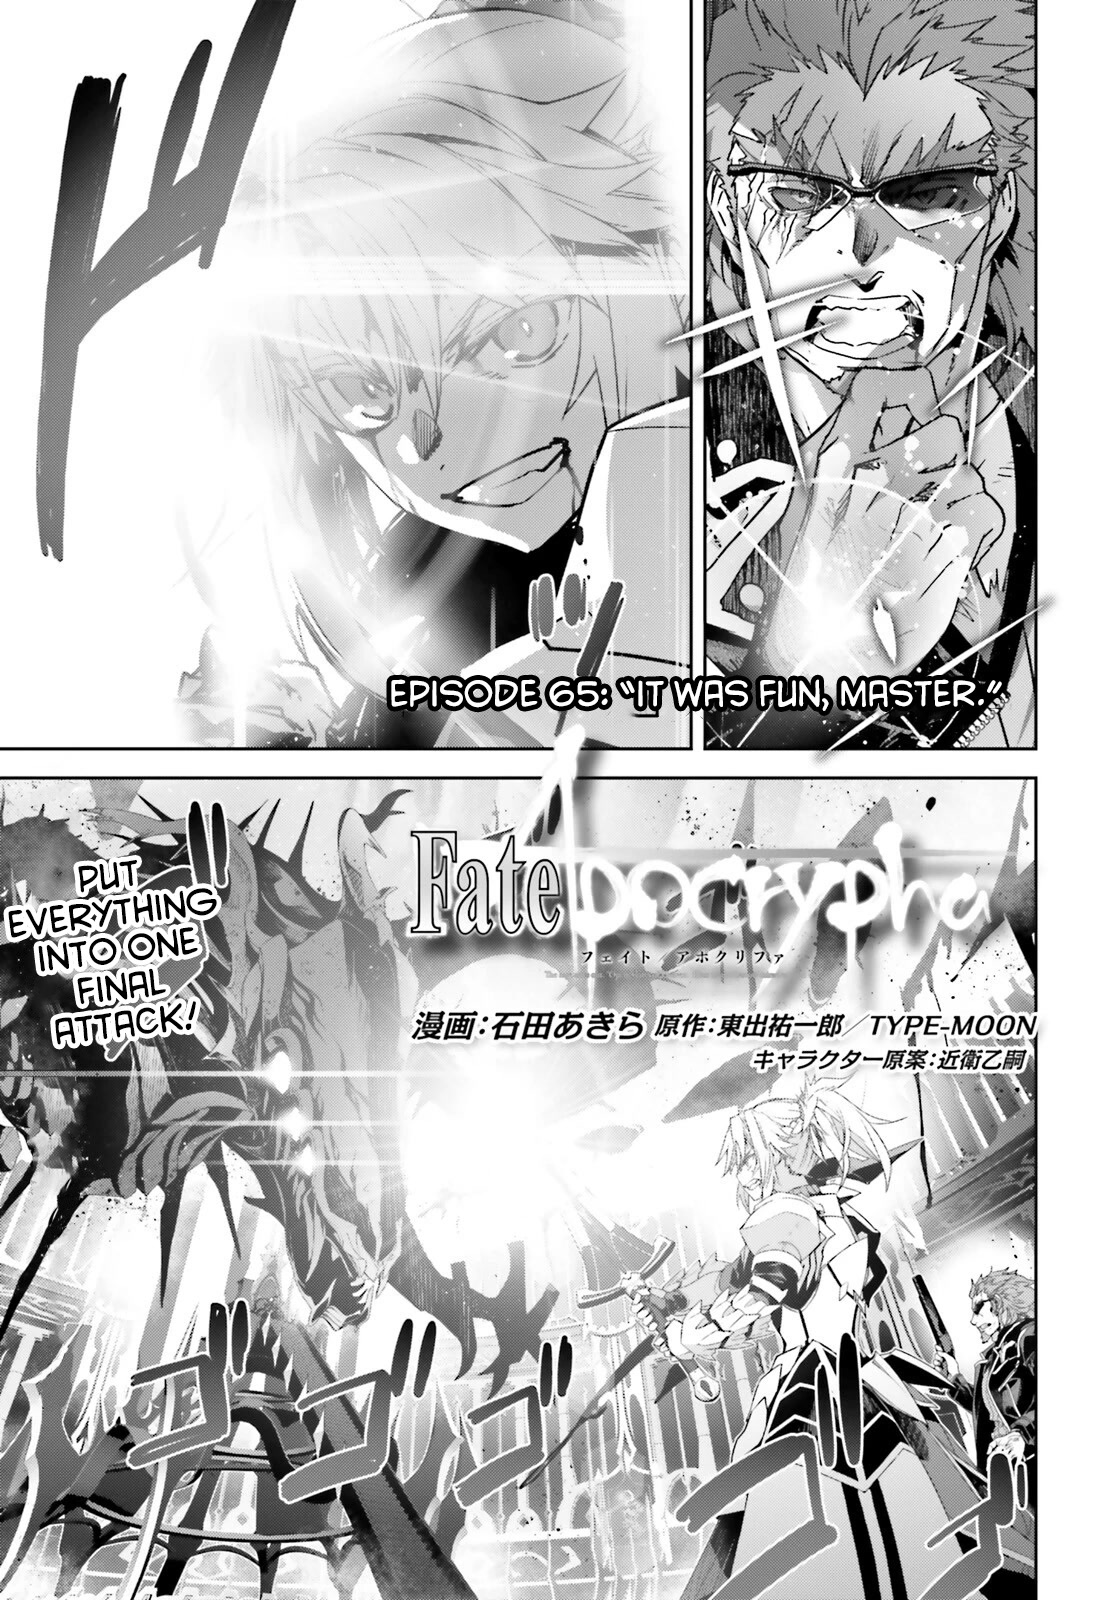 Fate/apocrypha Chapter 65: Episode: 65 